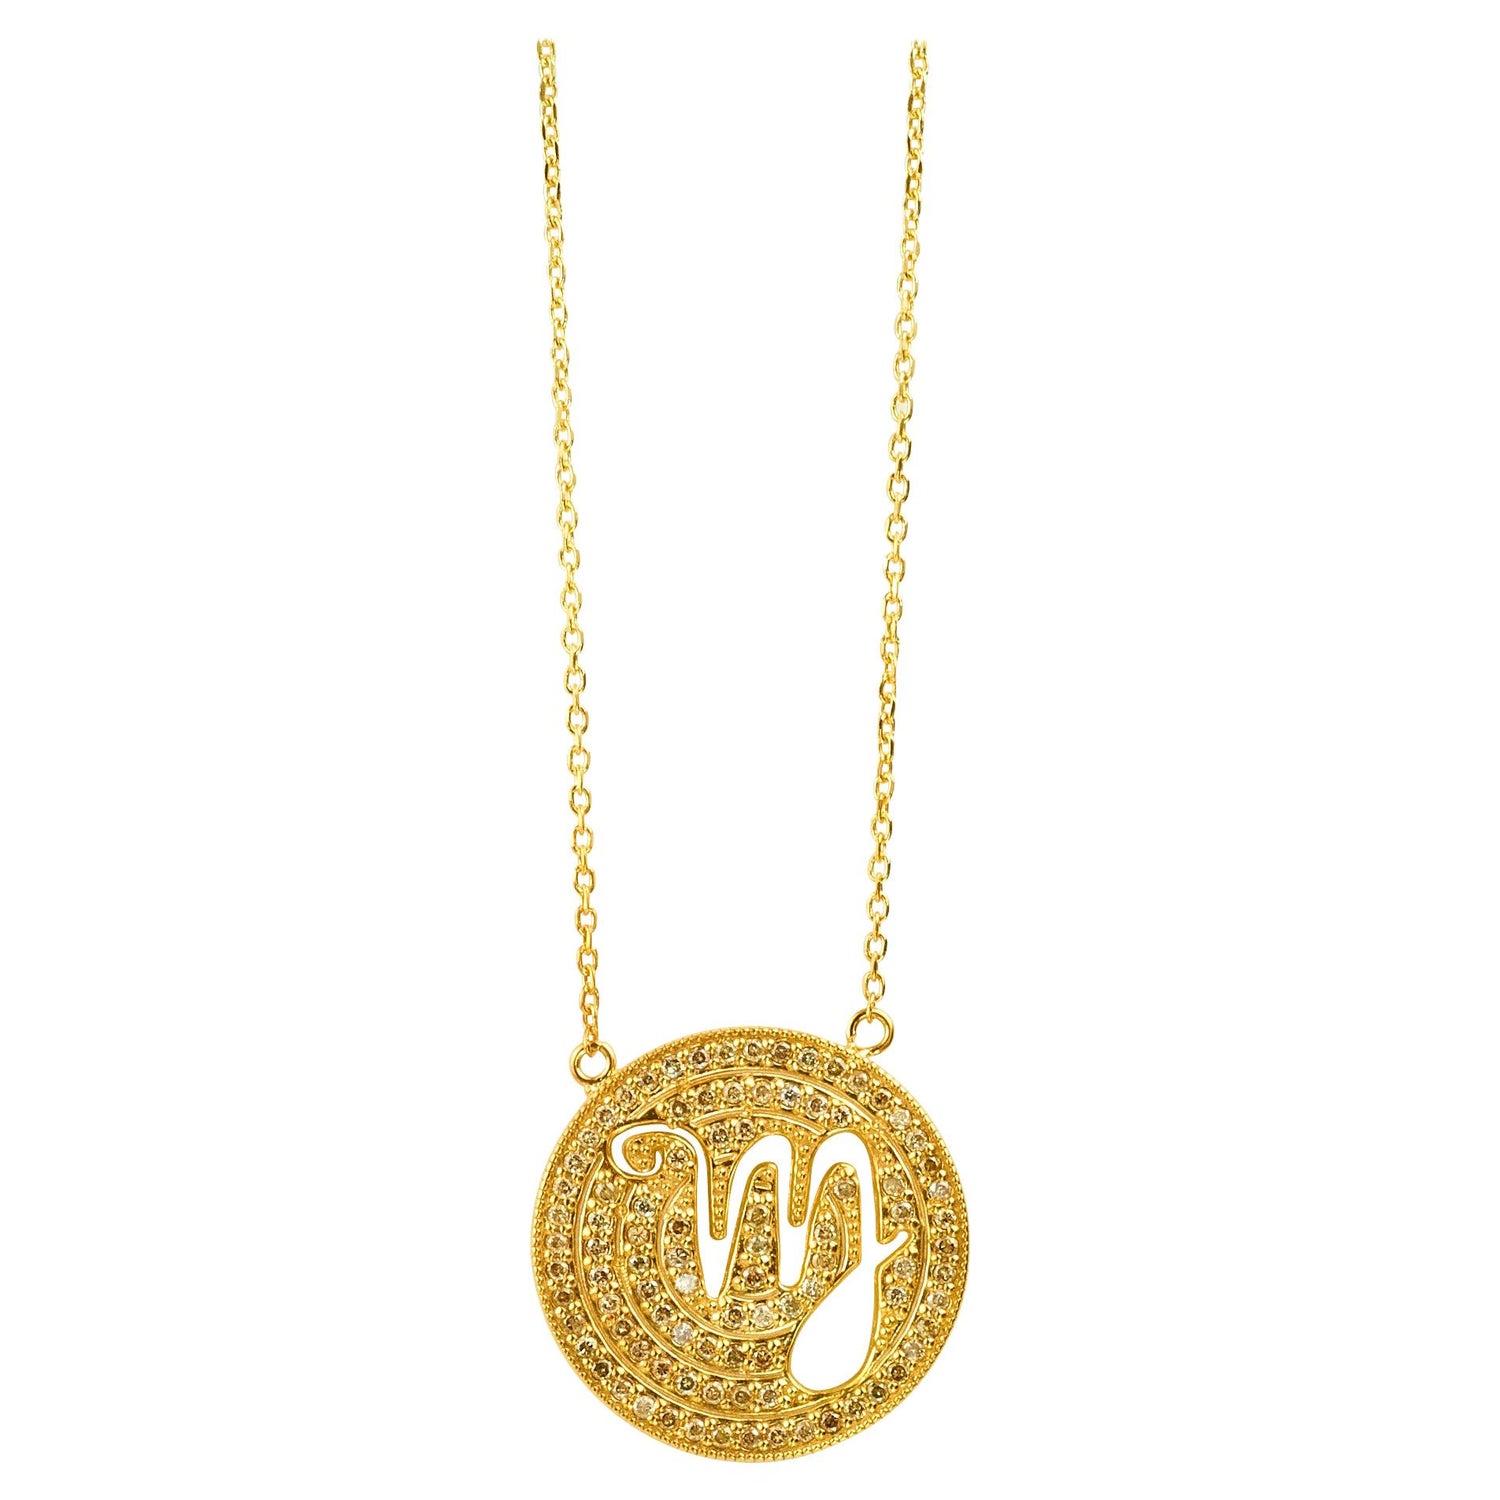 Virgo Pendant with 16 Necklace Jewels Obsession Zodiac Virgo Necklace 14K Rose Gold-plated 925 Silver Zodiac 